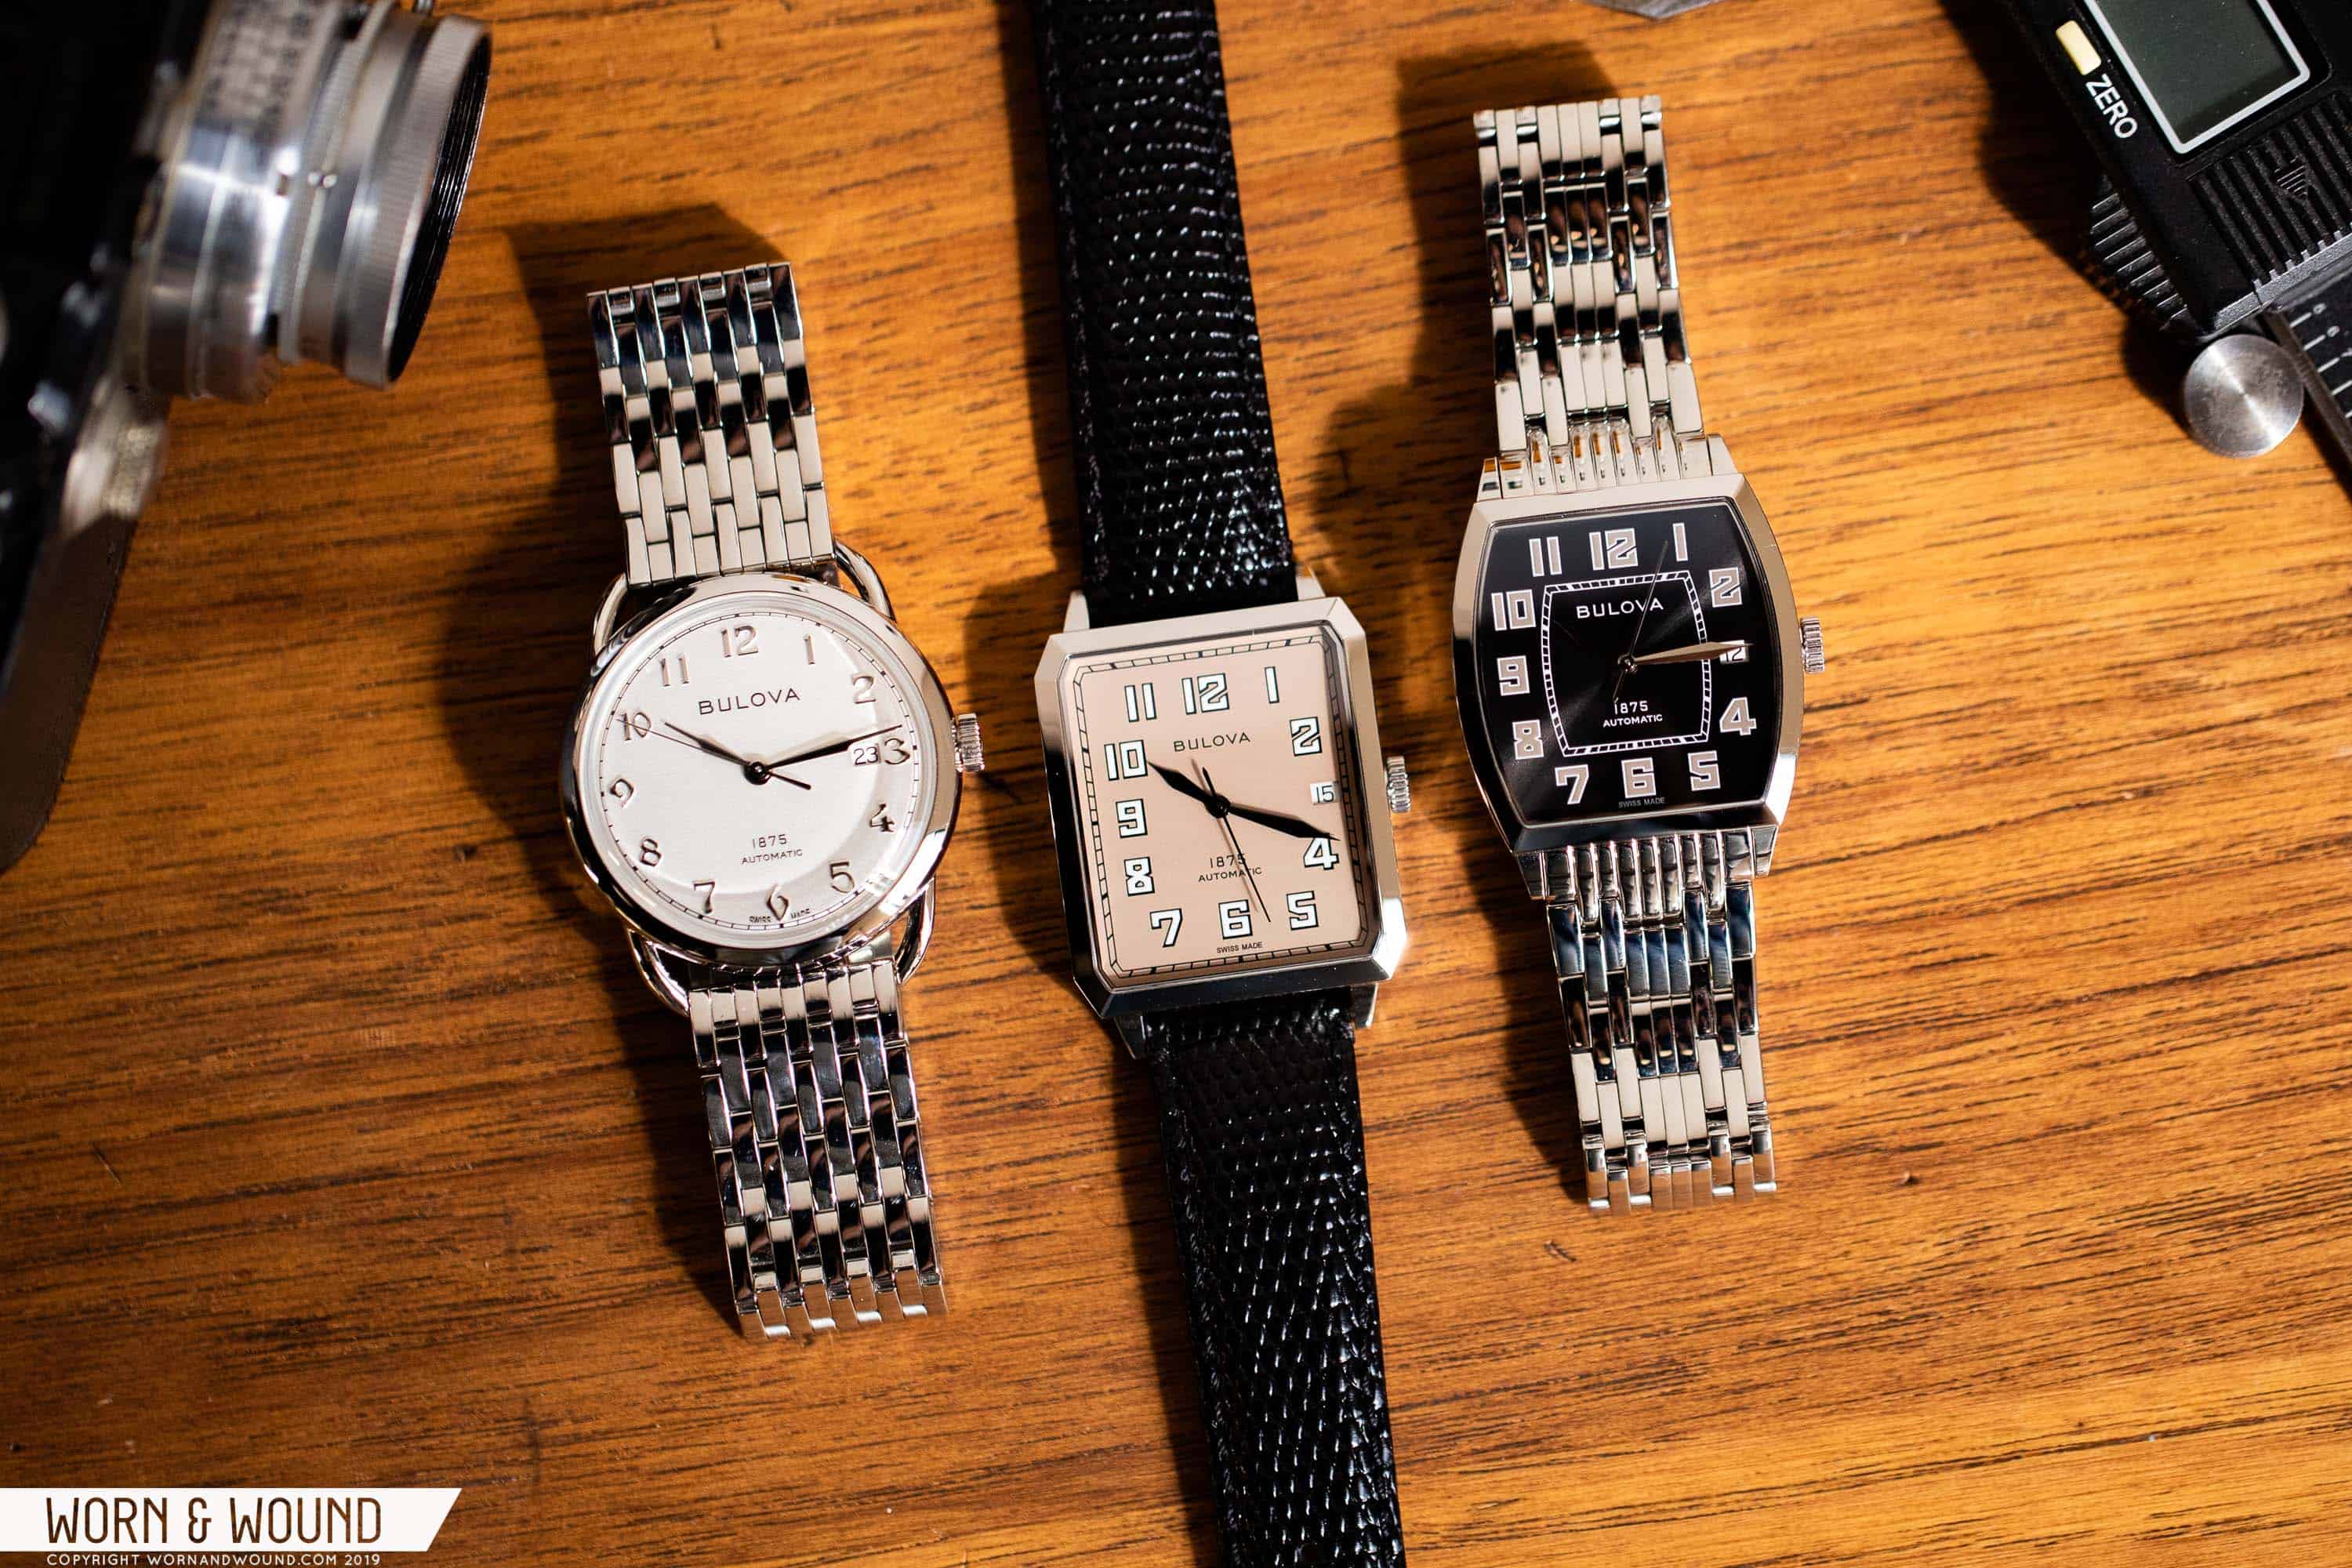 Past to Present: The History and Inspiration Behind Bulova’s Joseph Bulova Collection